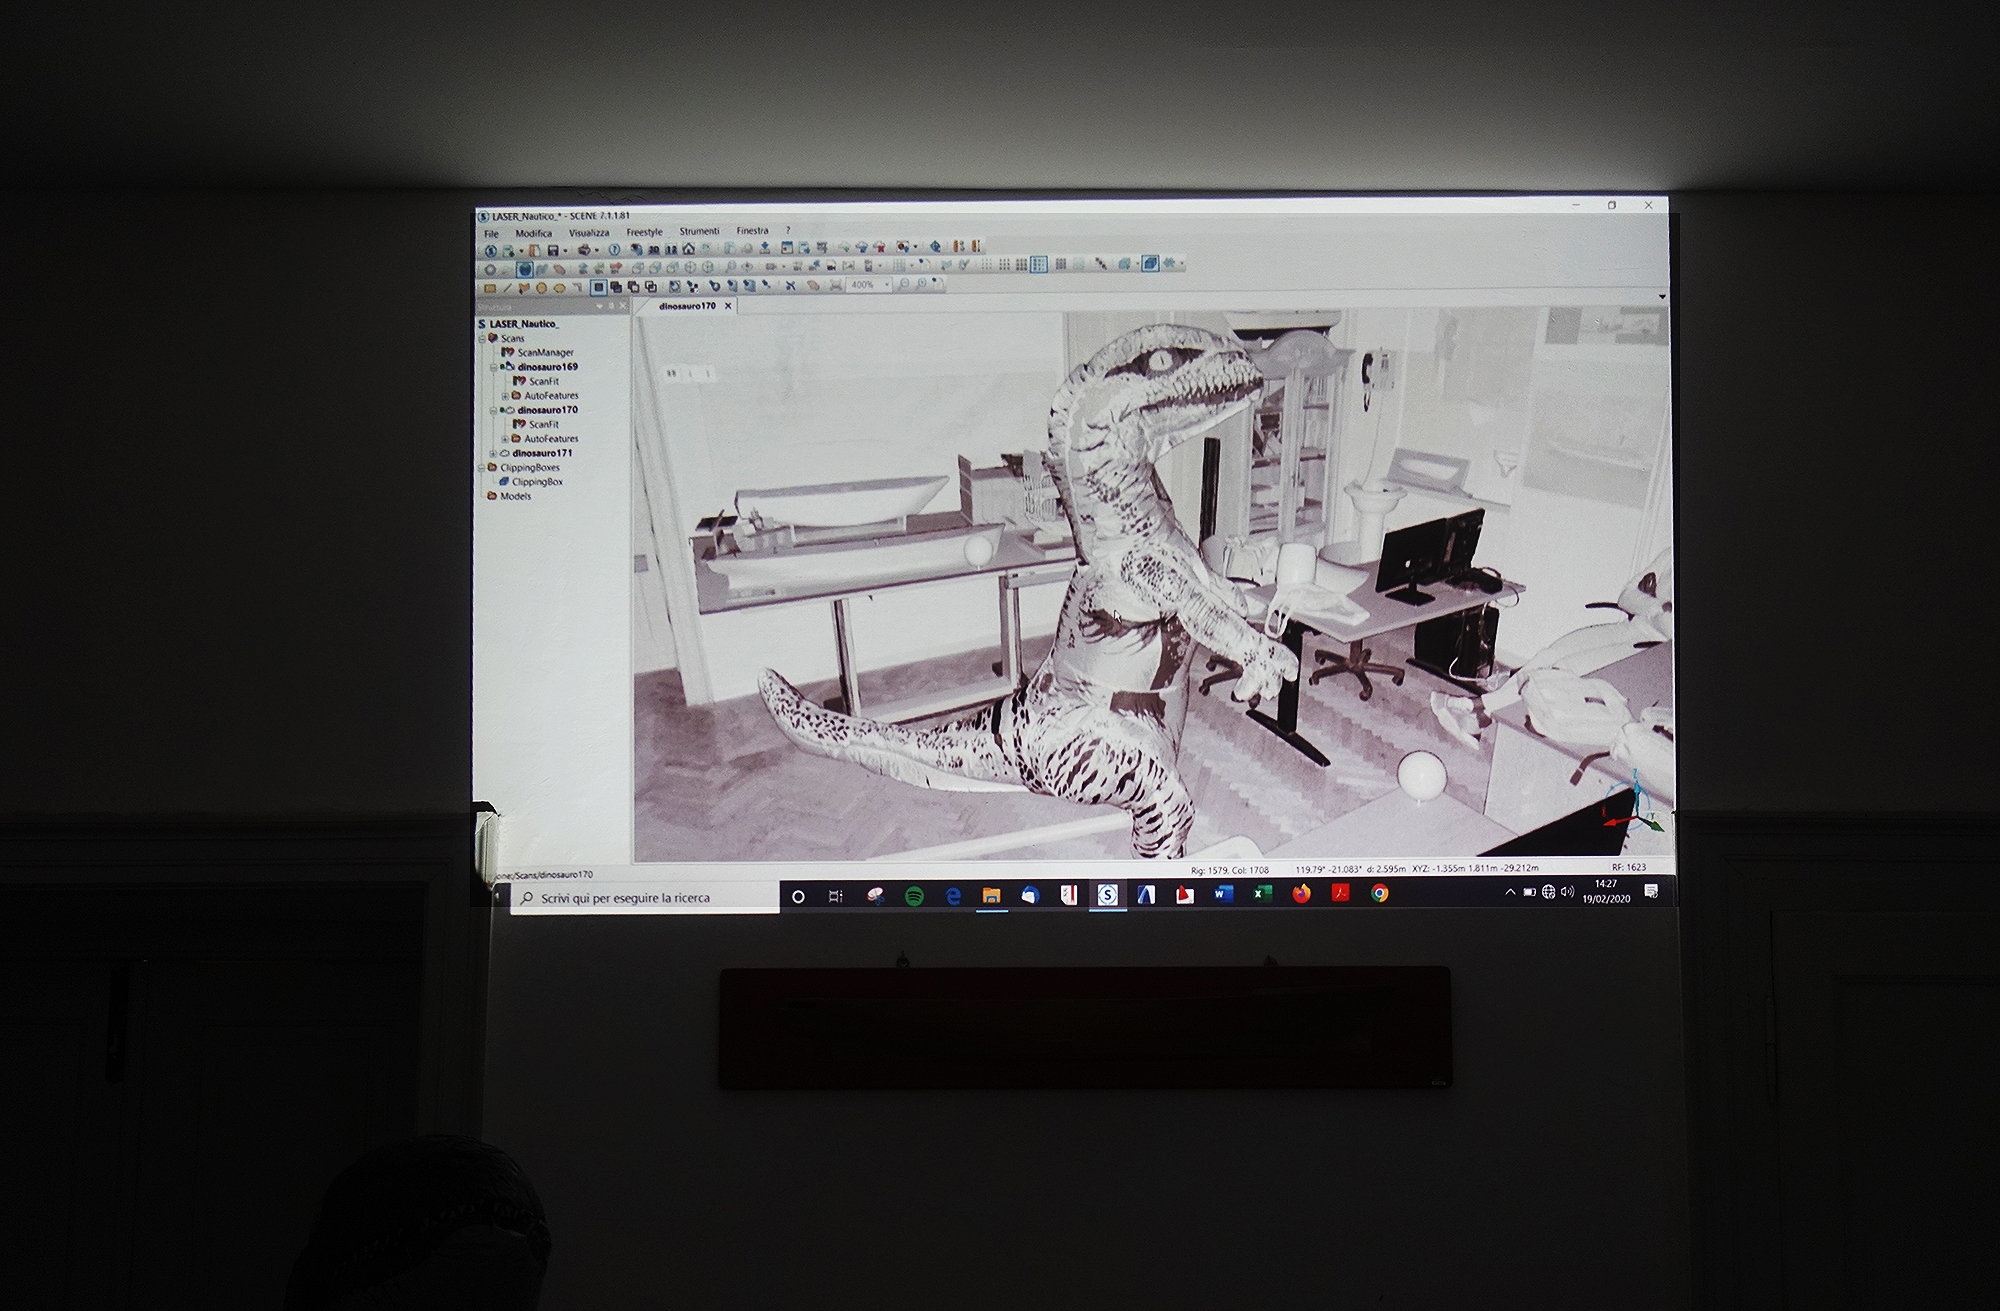 MOL2 Italy - 3D scan of the inflatable object and classroom (Istituto Nautico, Trieste, 19th February 2020)